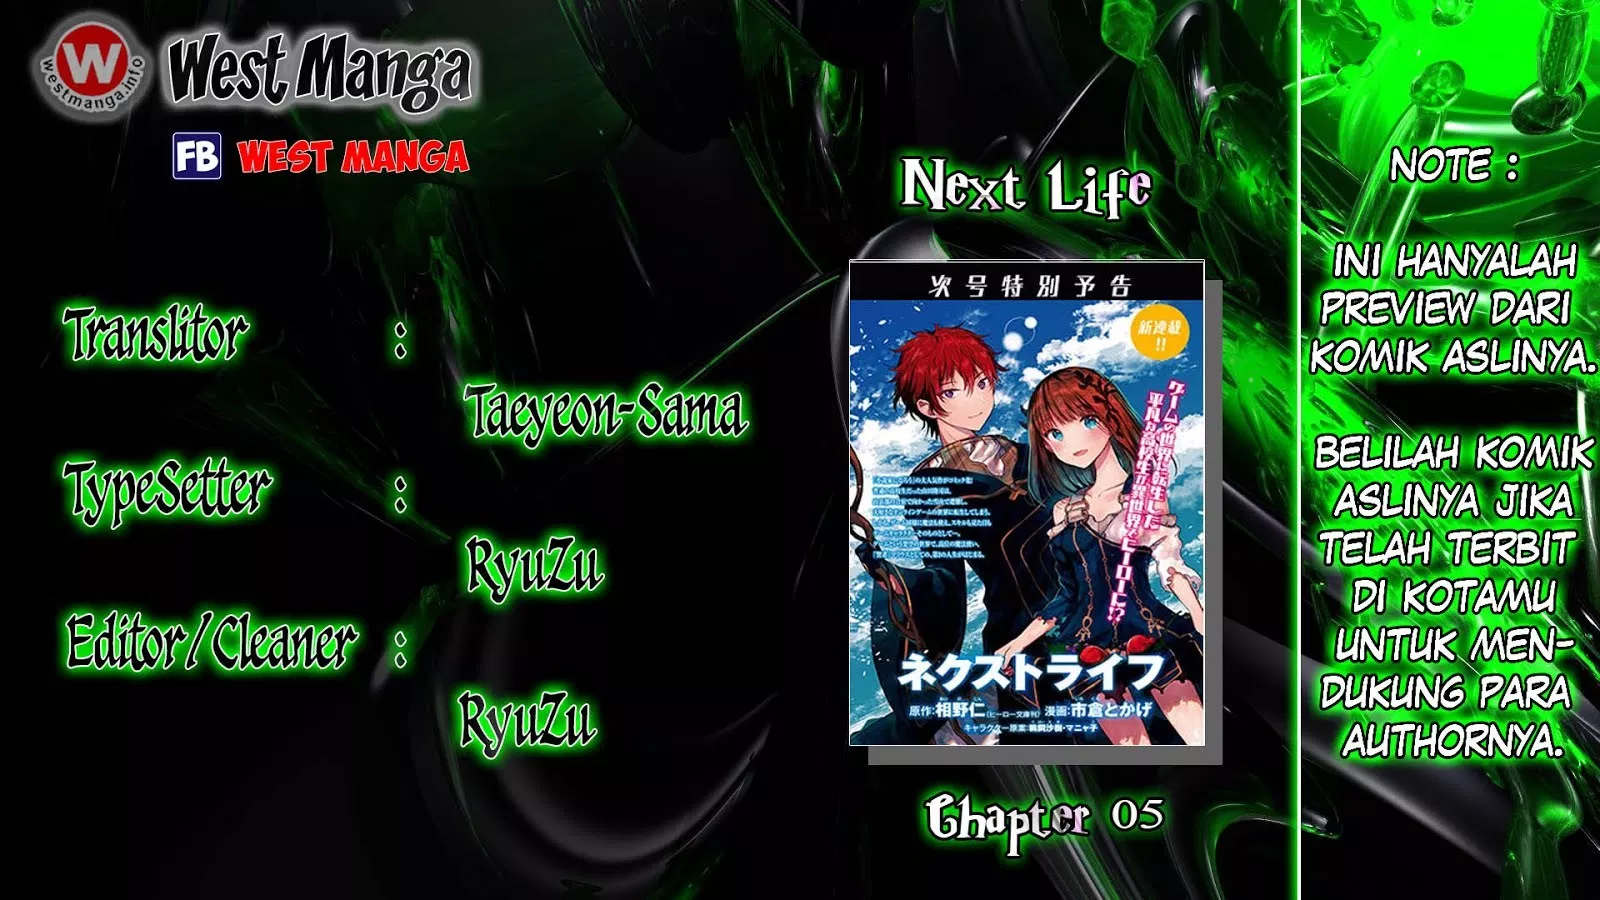 Next Life Chapter 05